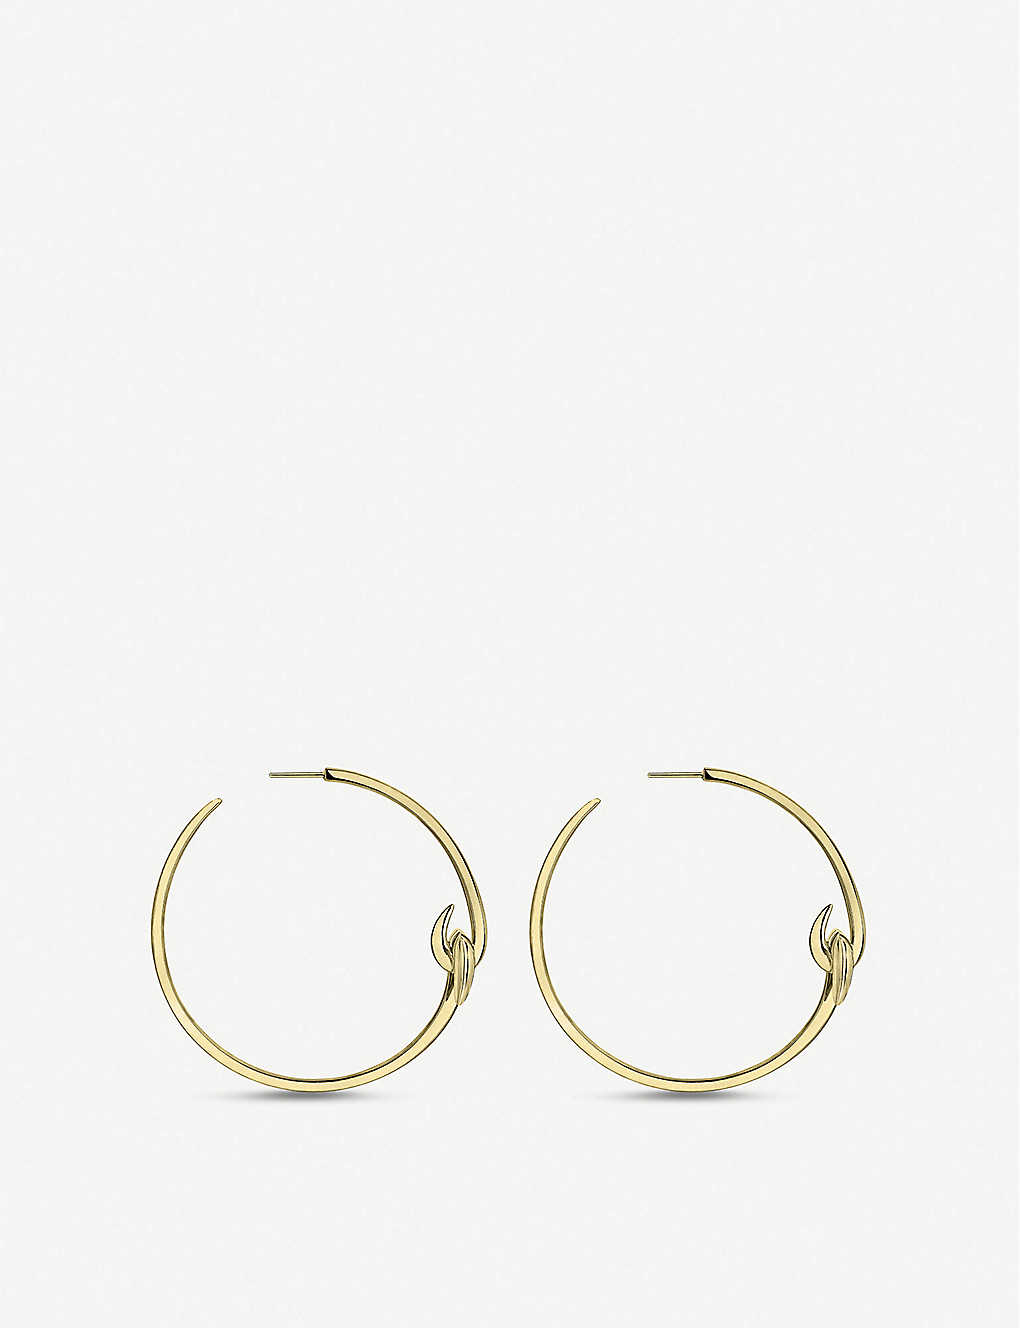 Shaun Leane Single Yellow Gold Vermeil Thorned Hoop Earring New but no box. 